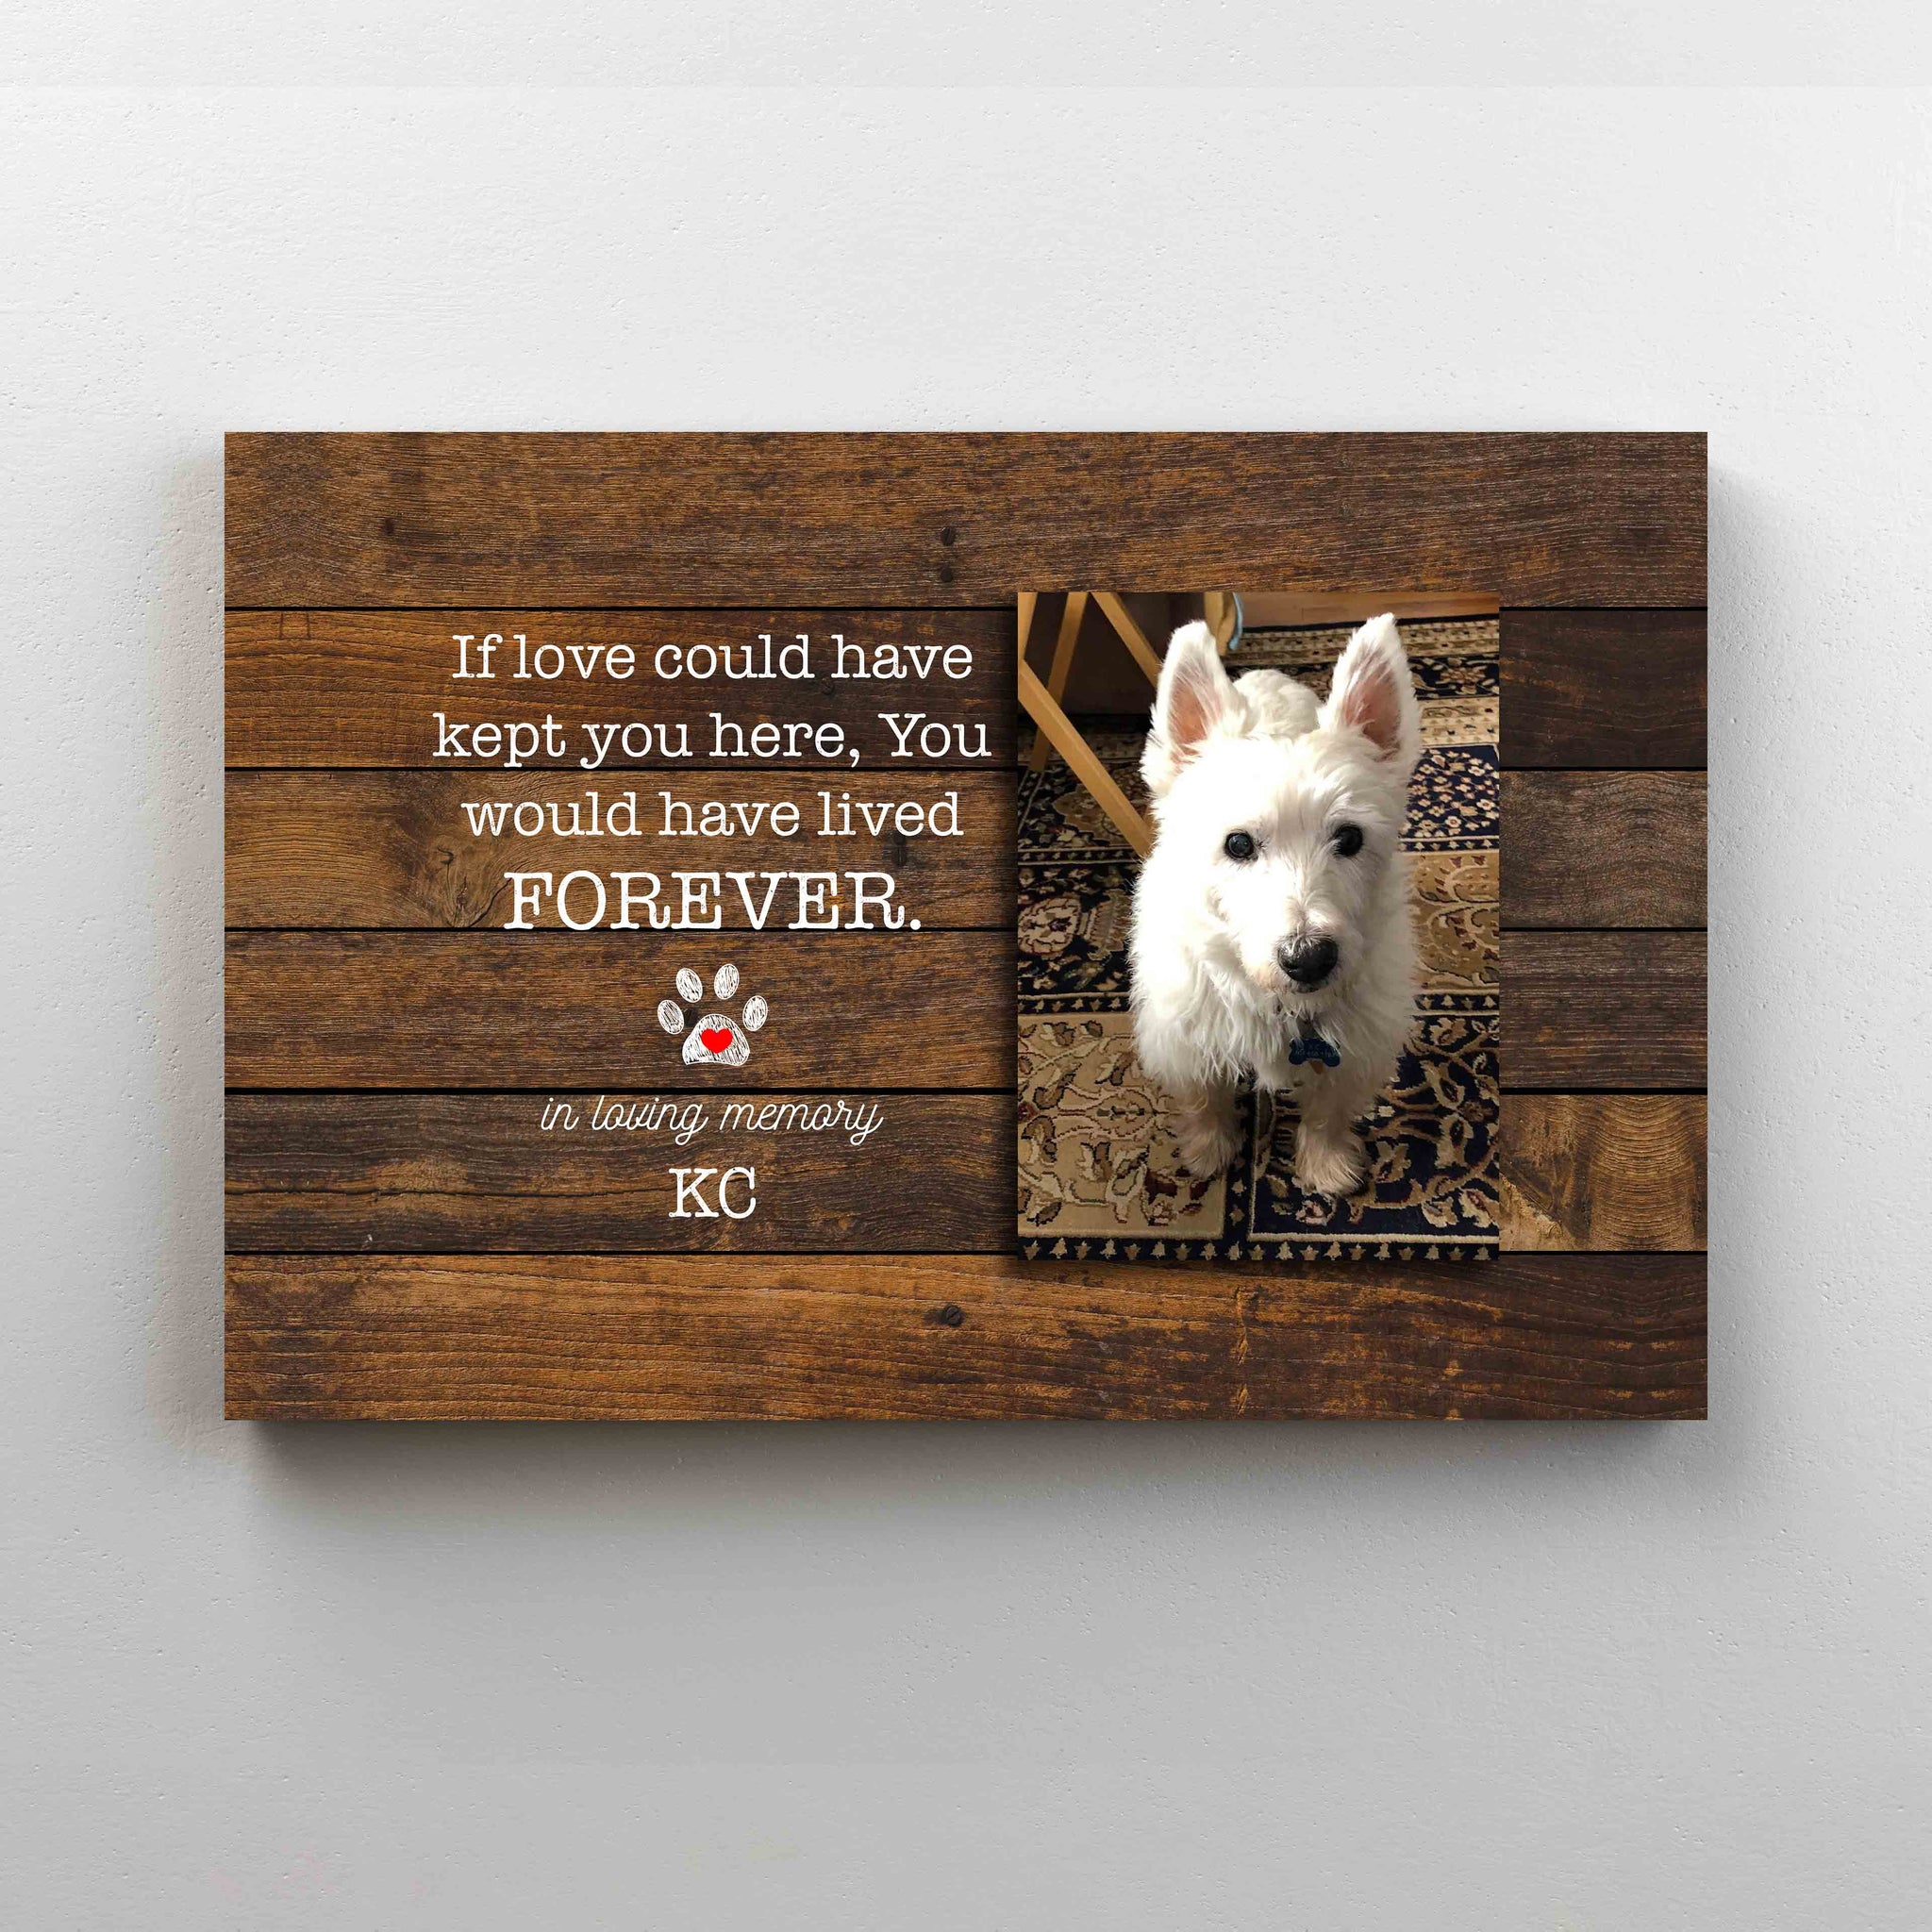 Personalized Image Canvas, If Love Could Have Kept You Here Canvas, Pet Memorial Canvas